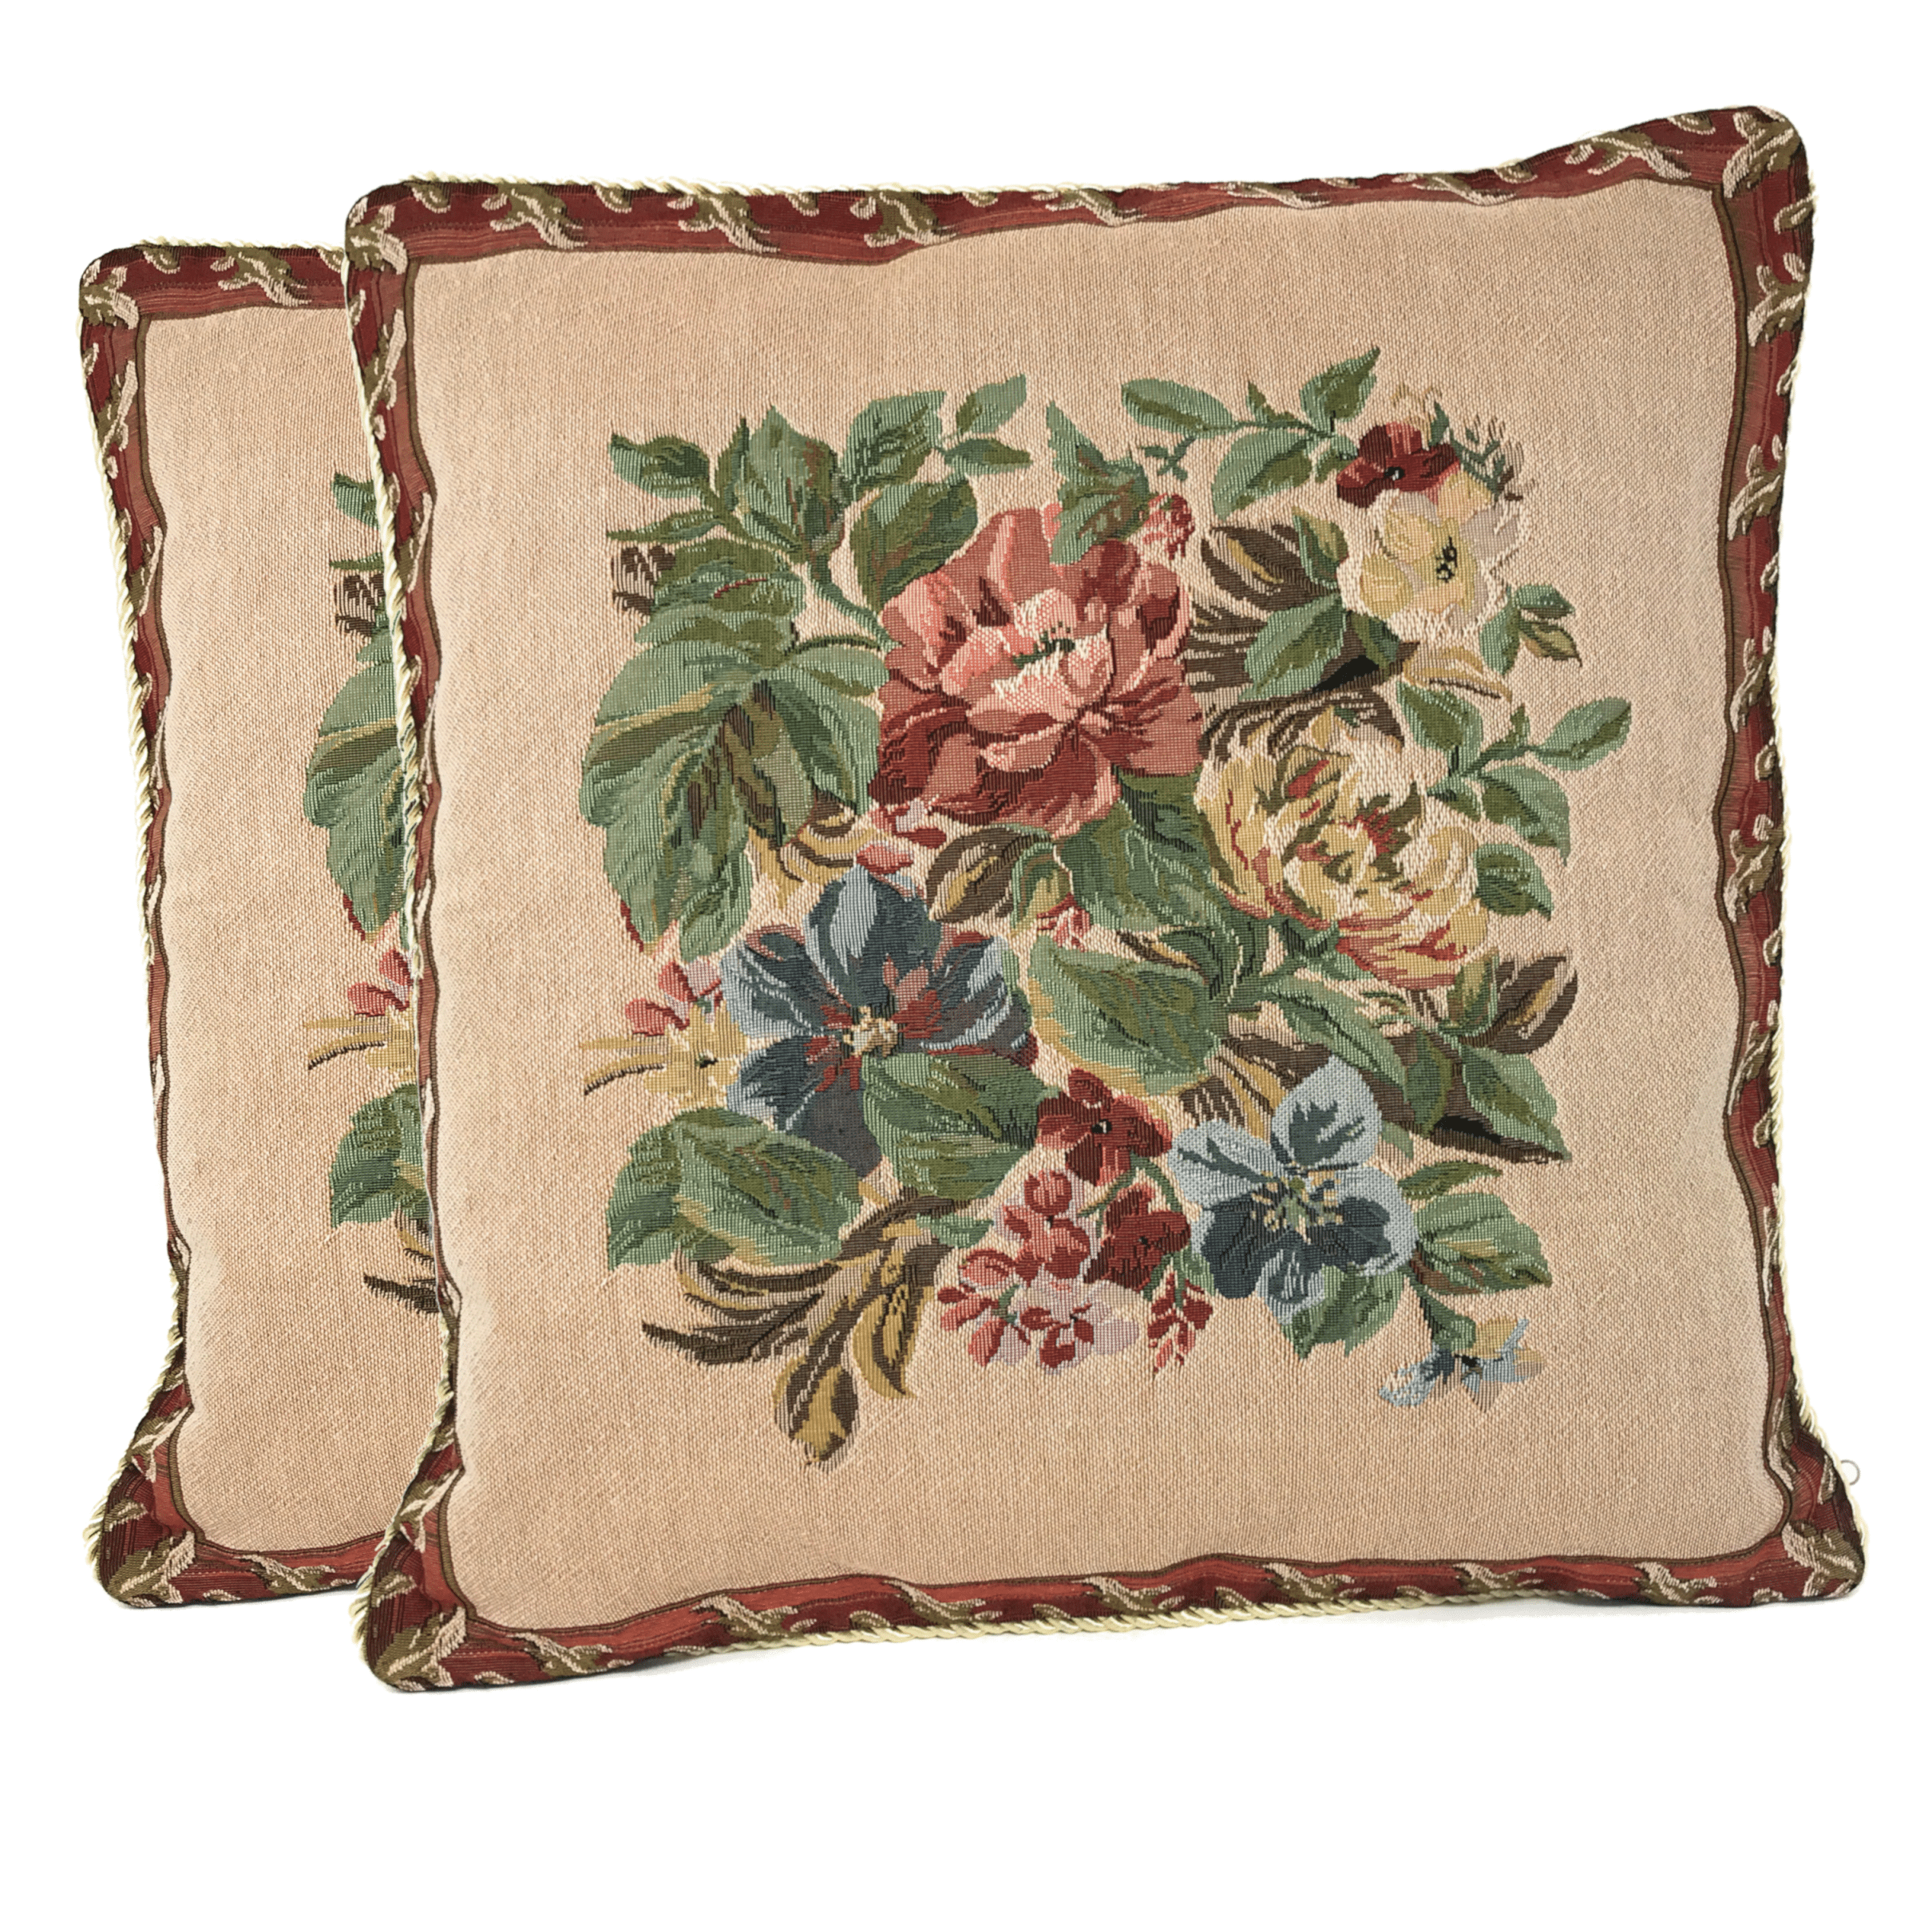 Tache 18 Inch Floral Red Yuletide Blooms Tapestry Throw Pillow Cover (5598) - Tache Home Fashion